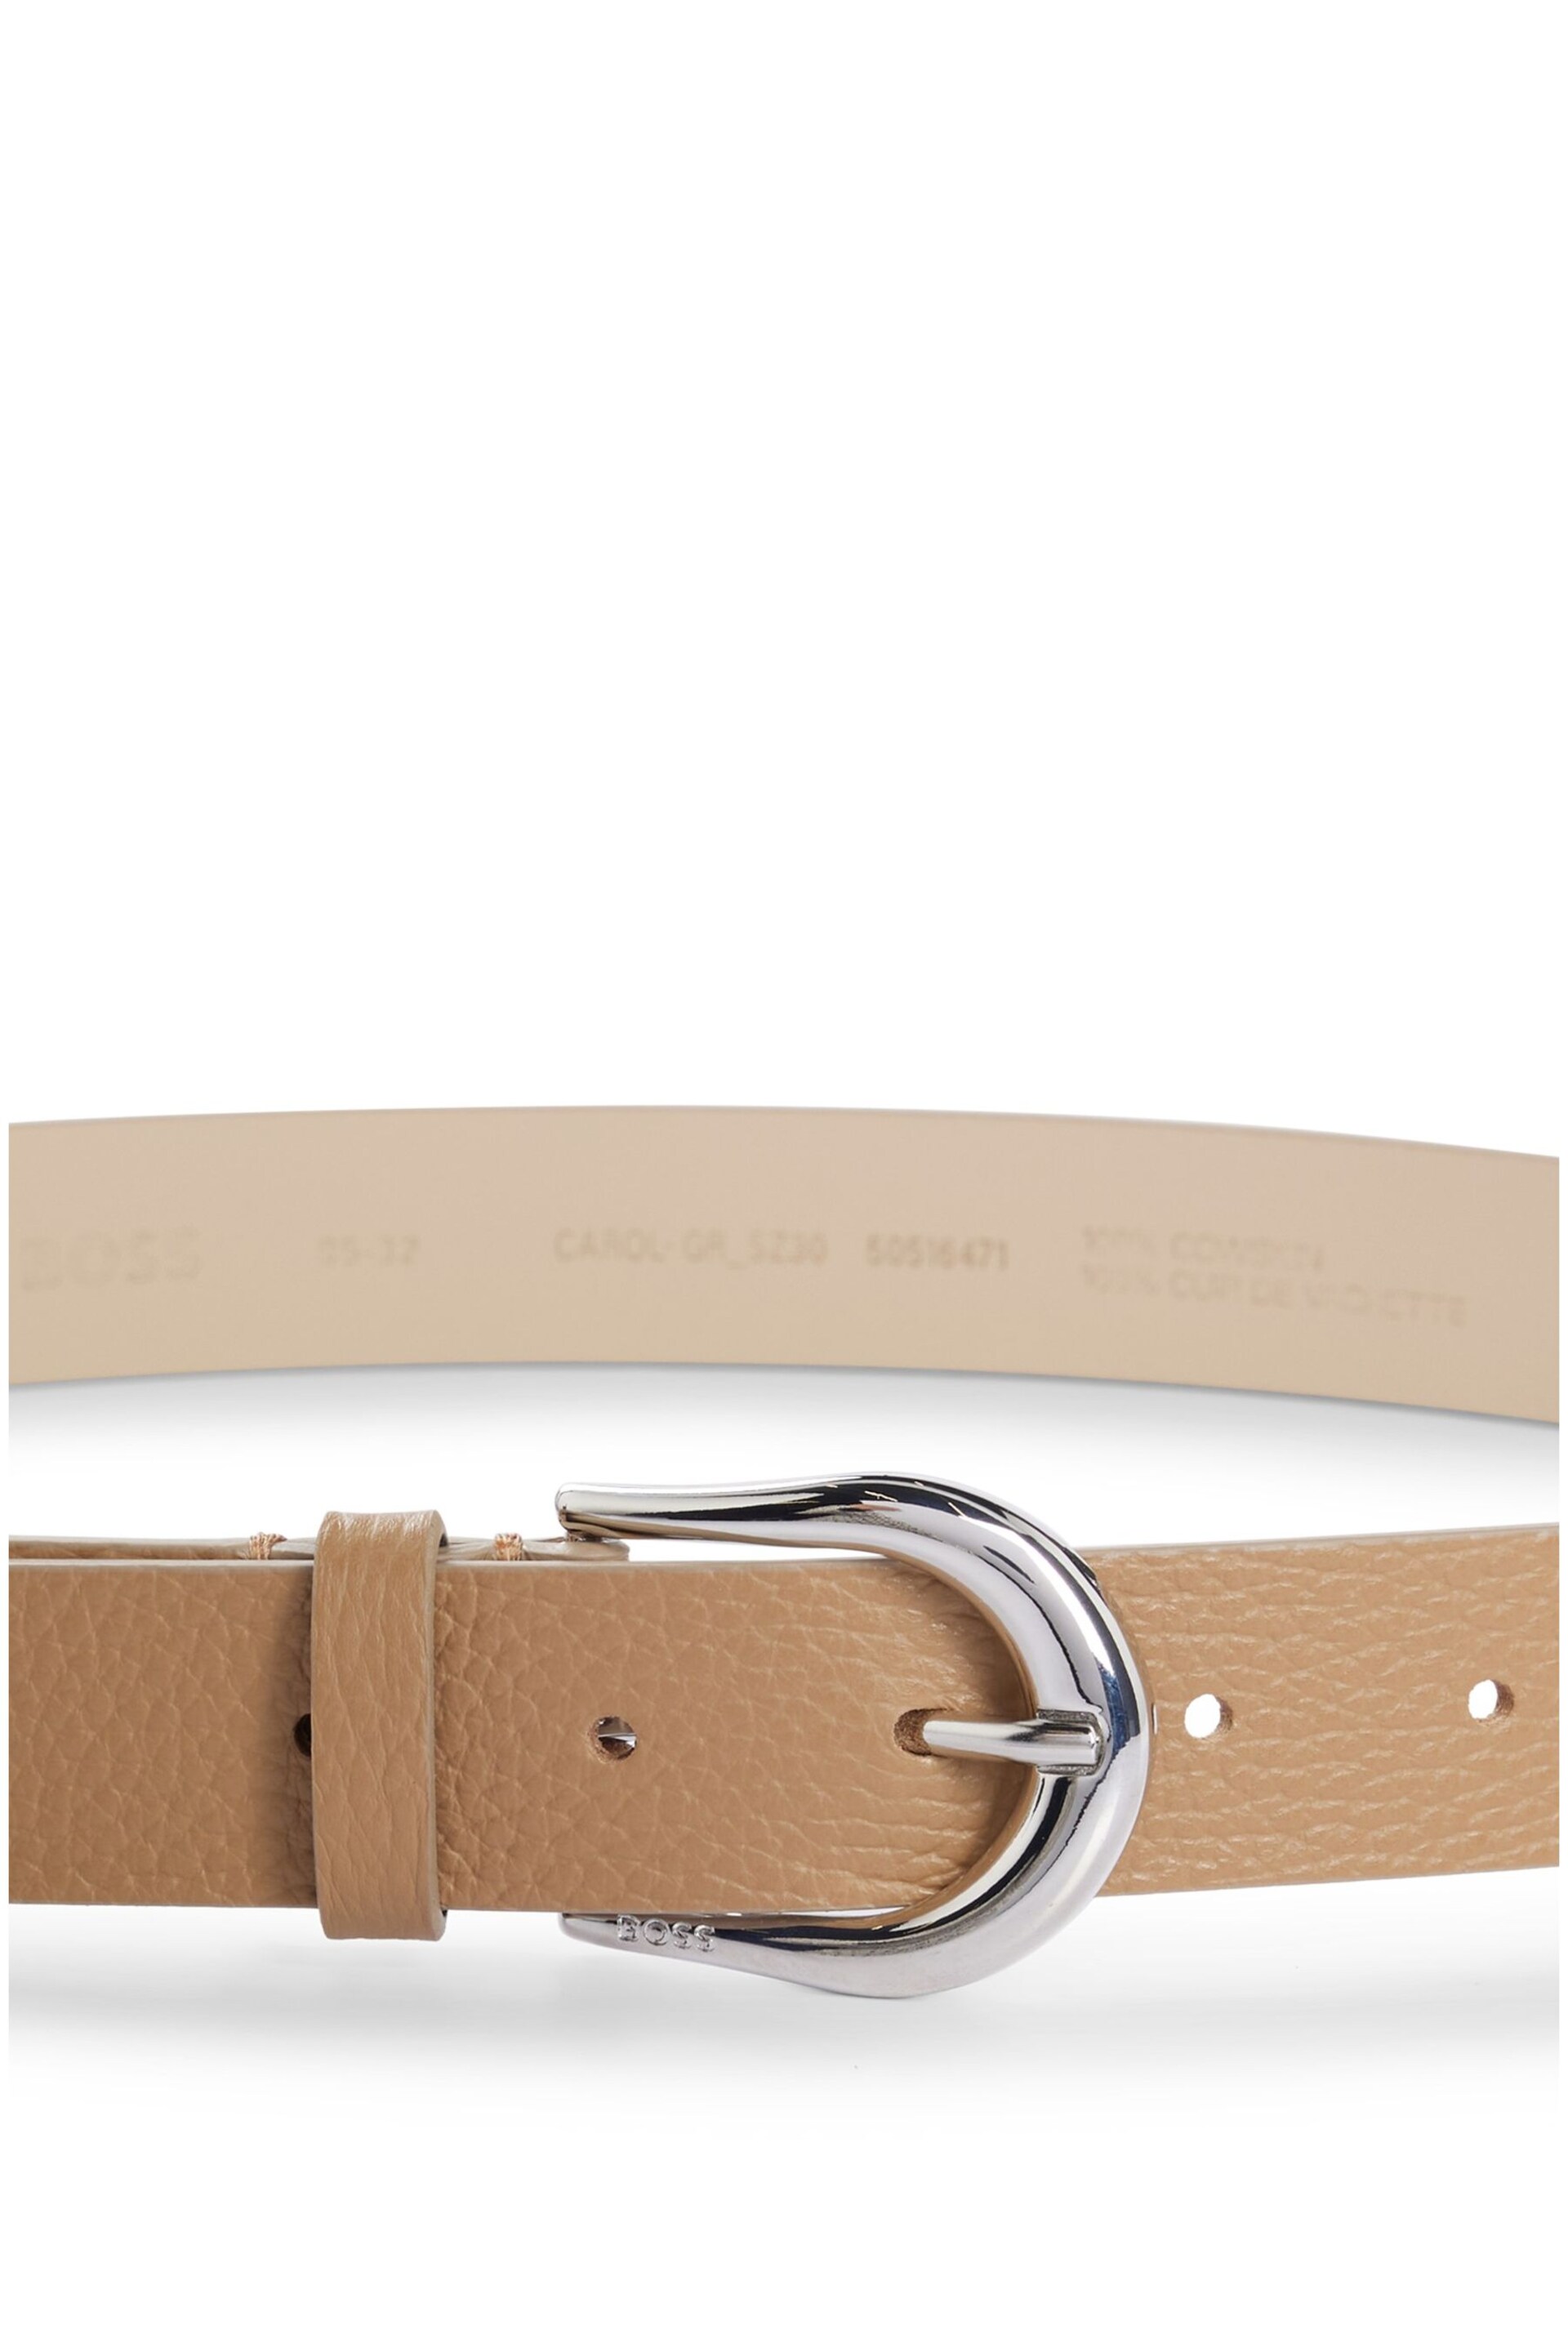 BOSS Natural Italian-Leather Belt With Polished Silver Hardware - Image 2 of 5